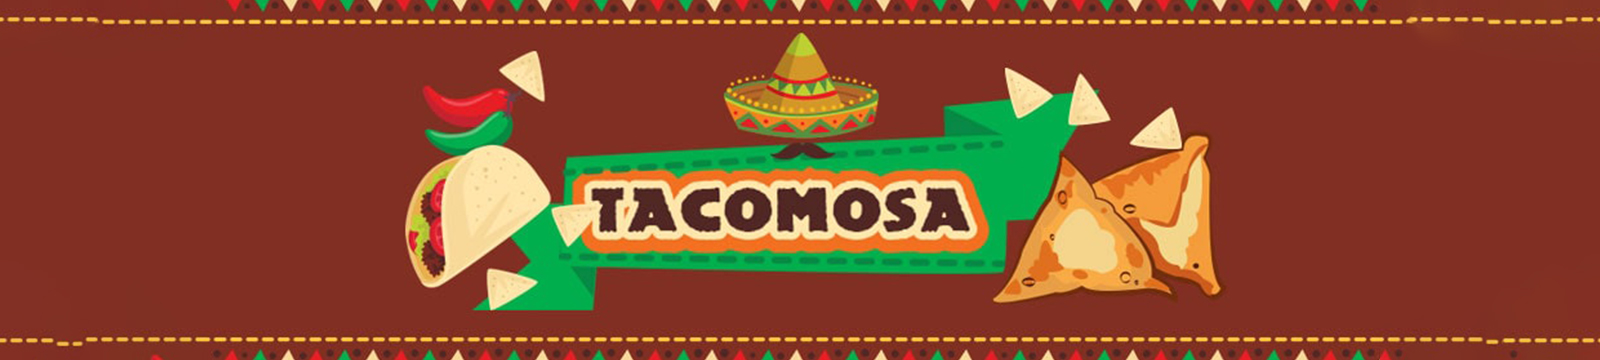 Tacomosa Festival – An Amalgamation of Indian & Mexican Flavours